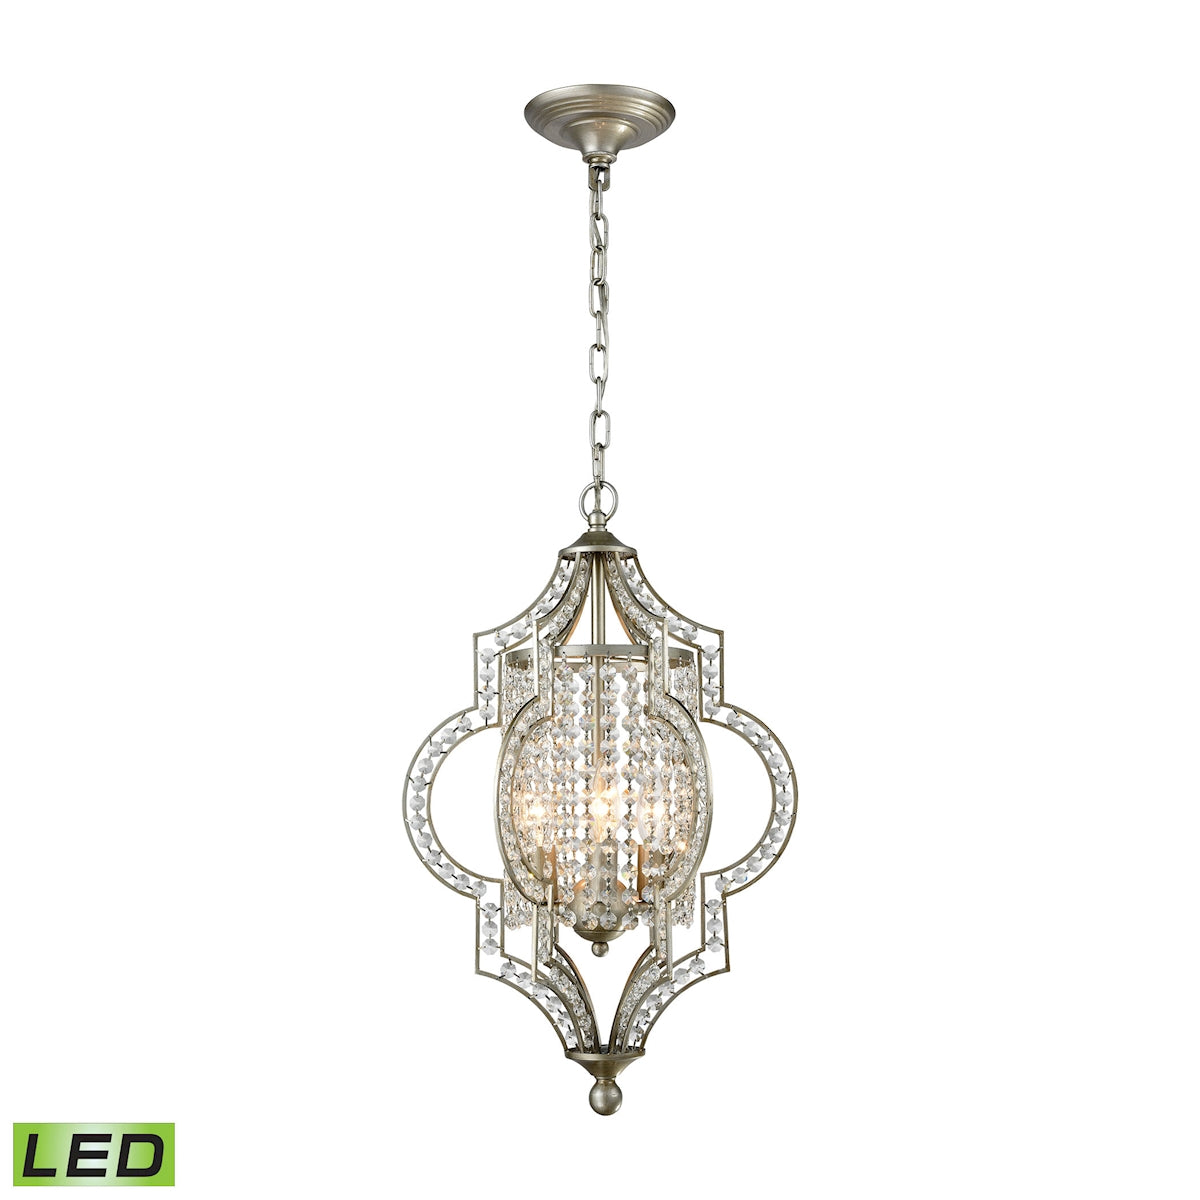 ELK Lighting 16270/3-LED Gabrielle 3-Light Chandelier in Aged Silver with Clear Crystal - Includes LED Bulbs